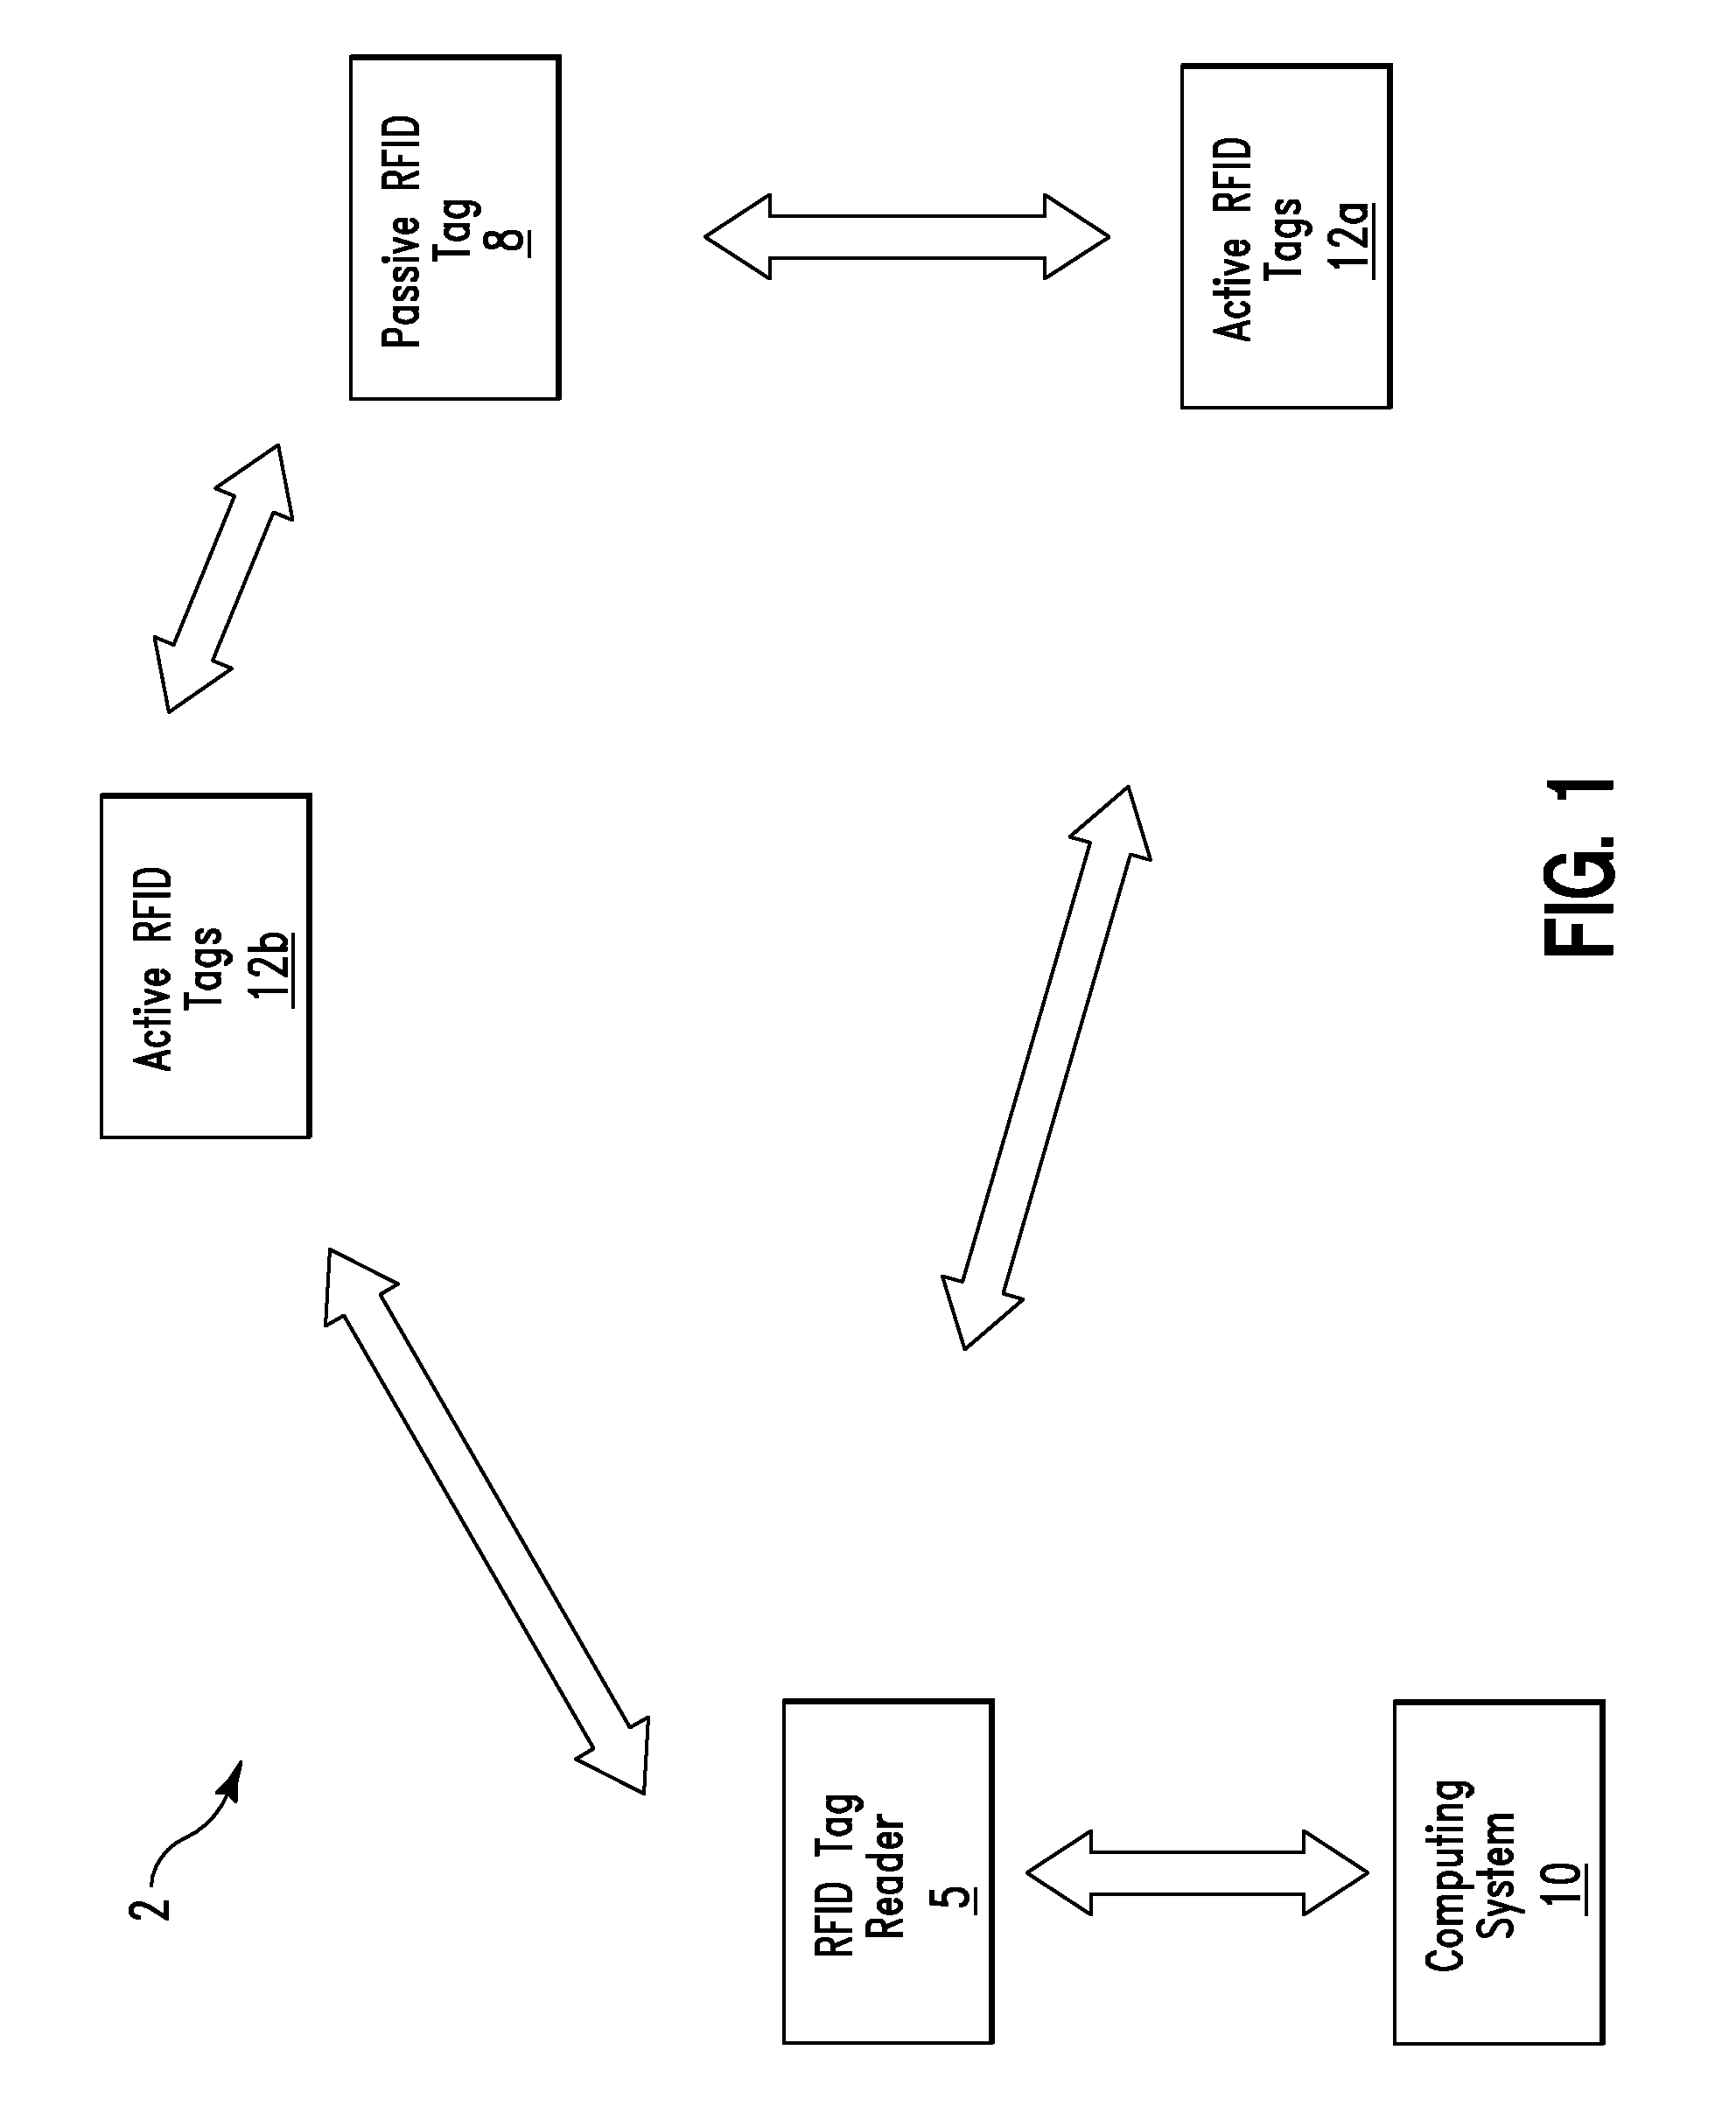 Location localization method and system